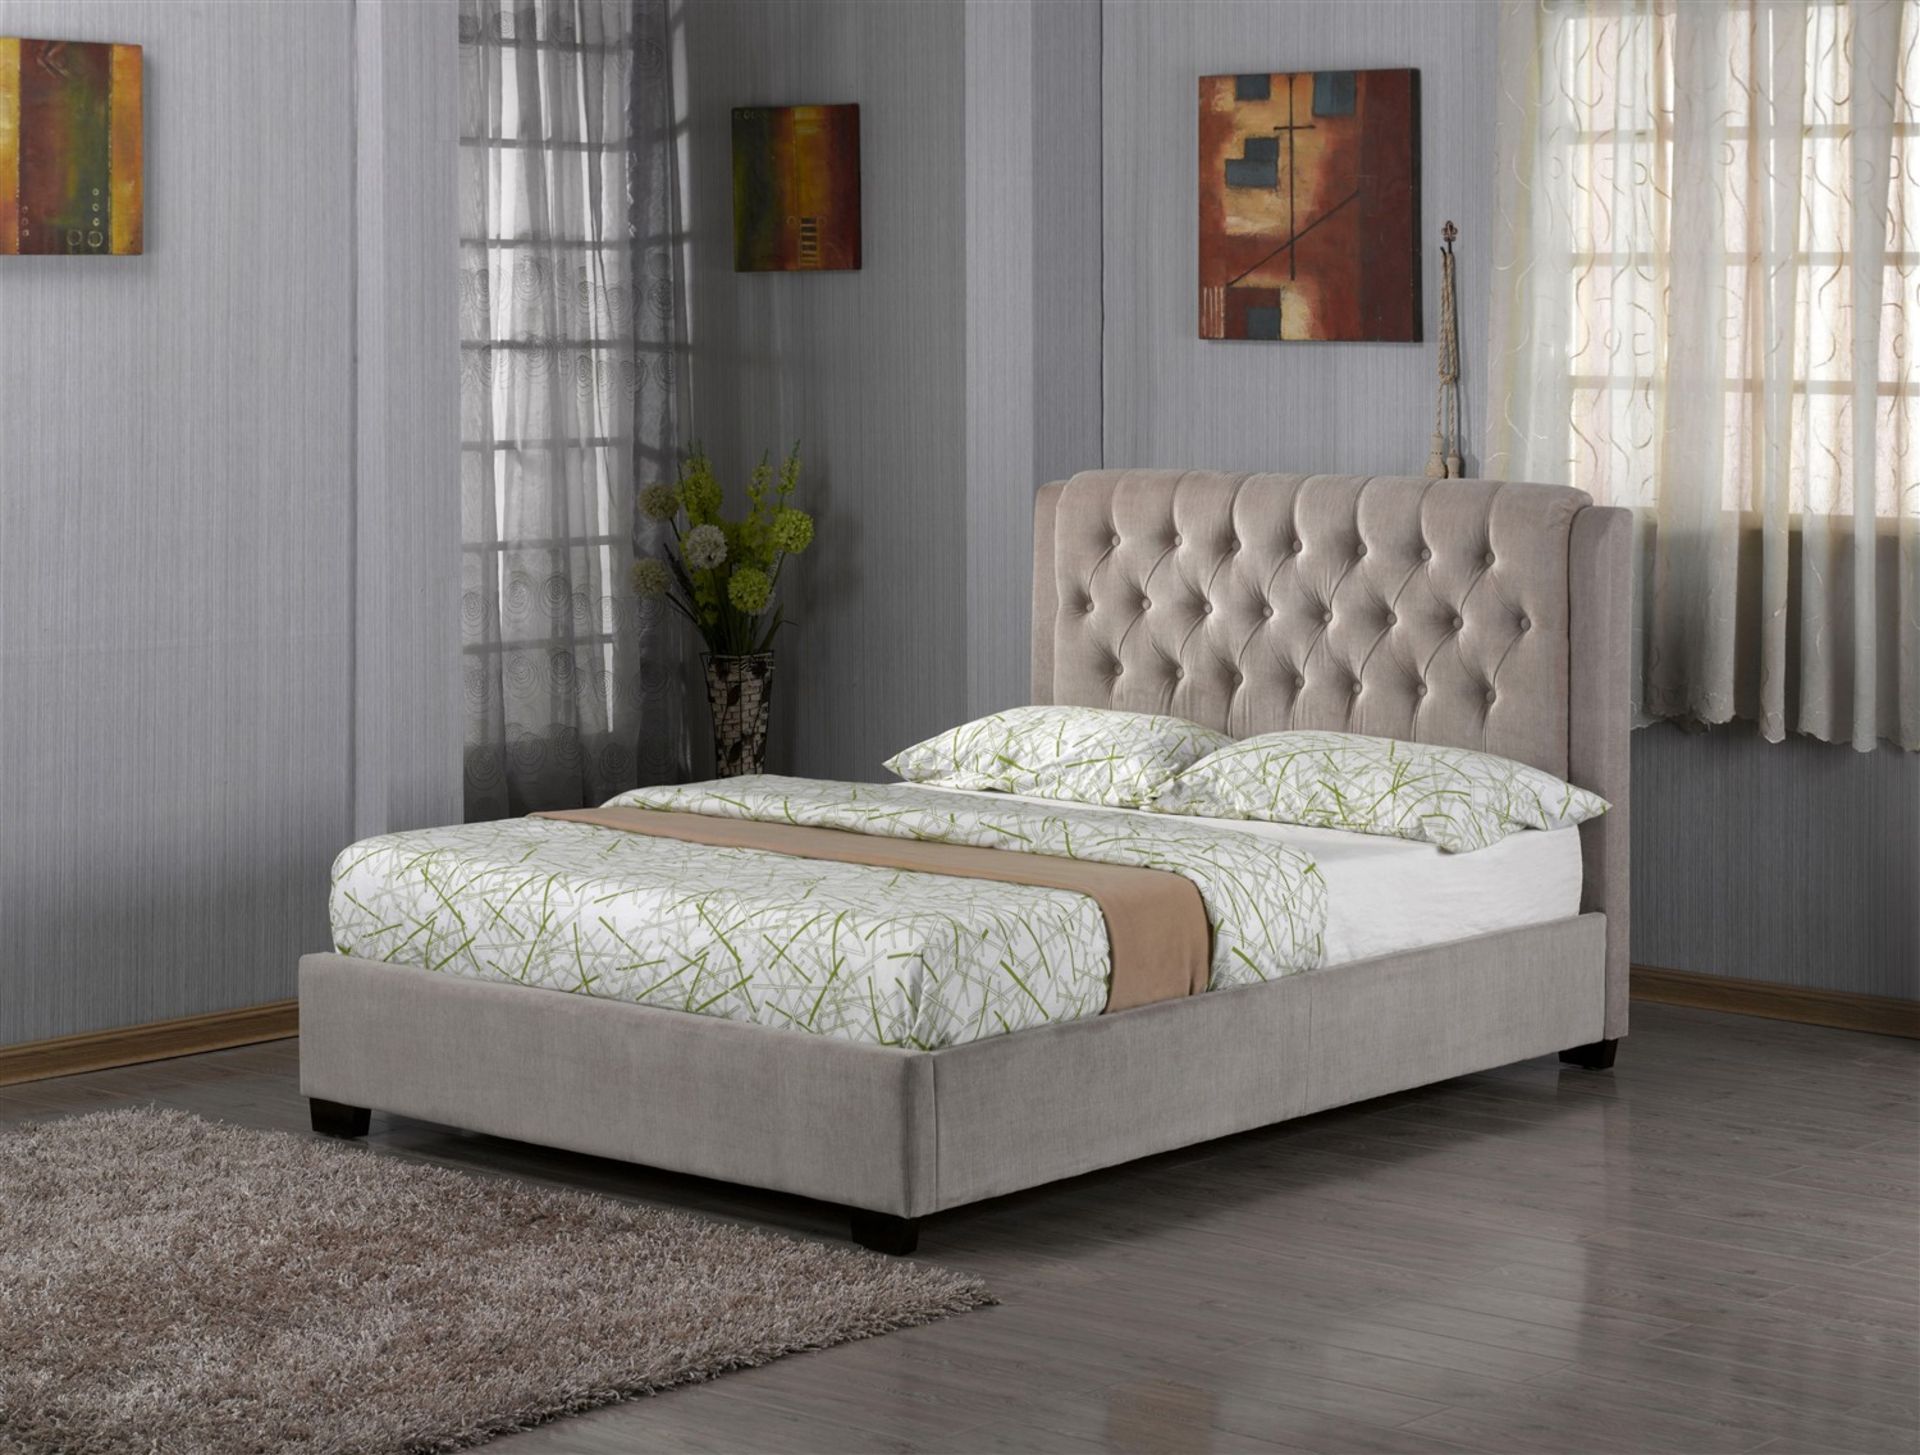 Brand new boxed double Alden bedstead in taupe